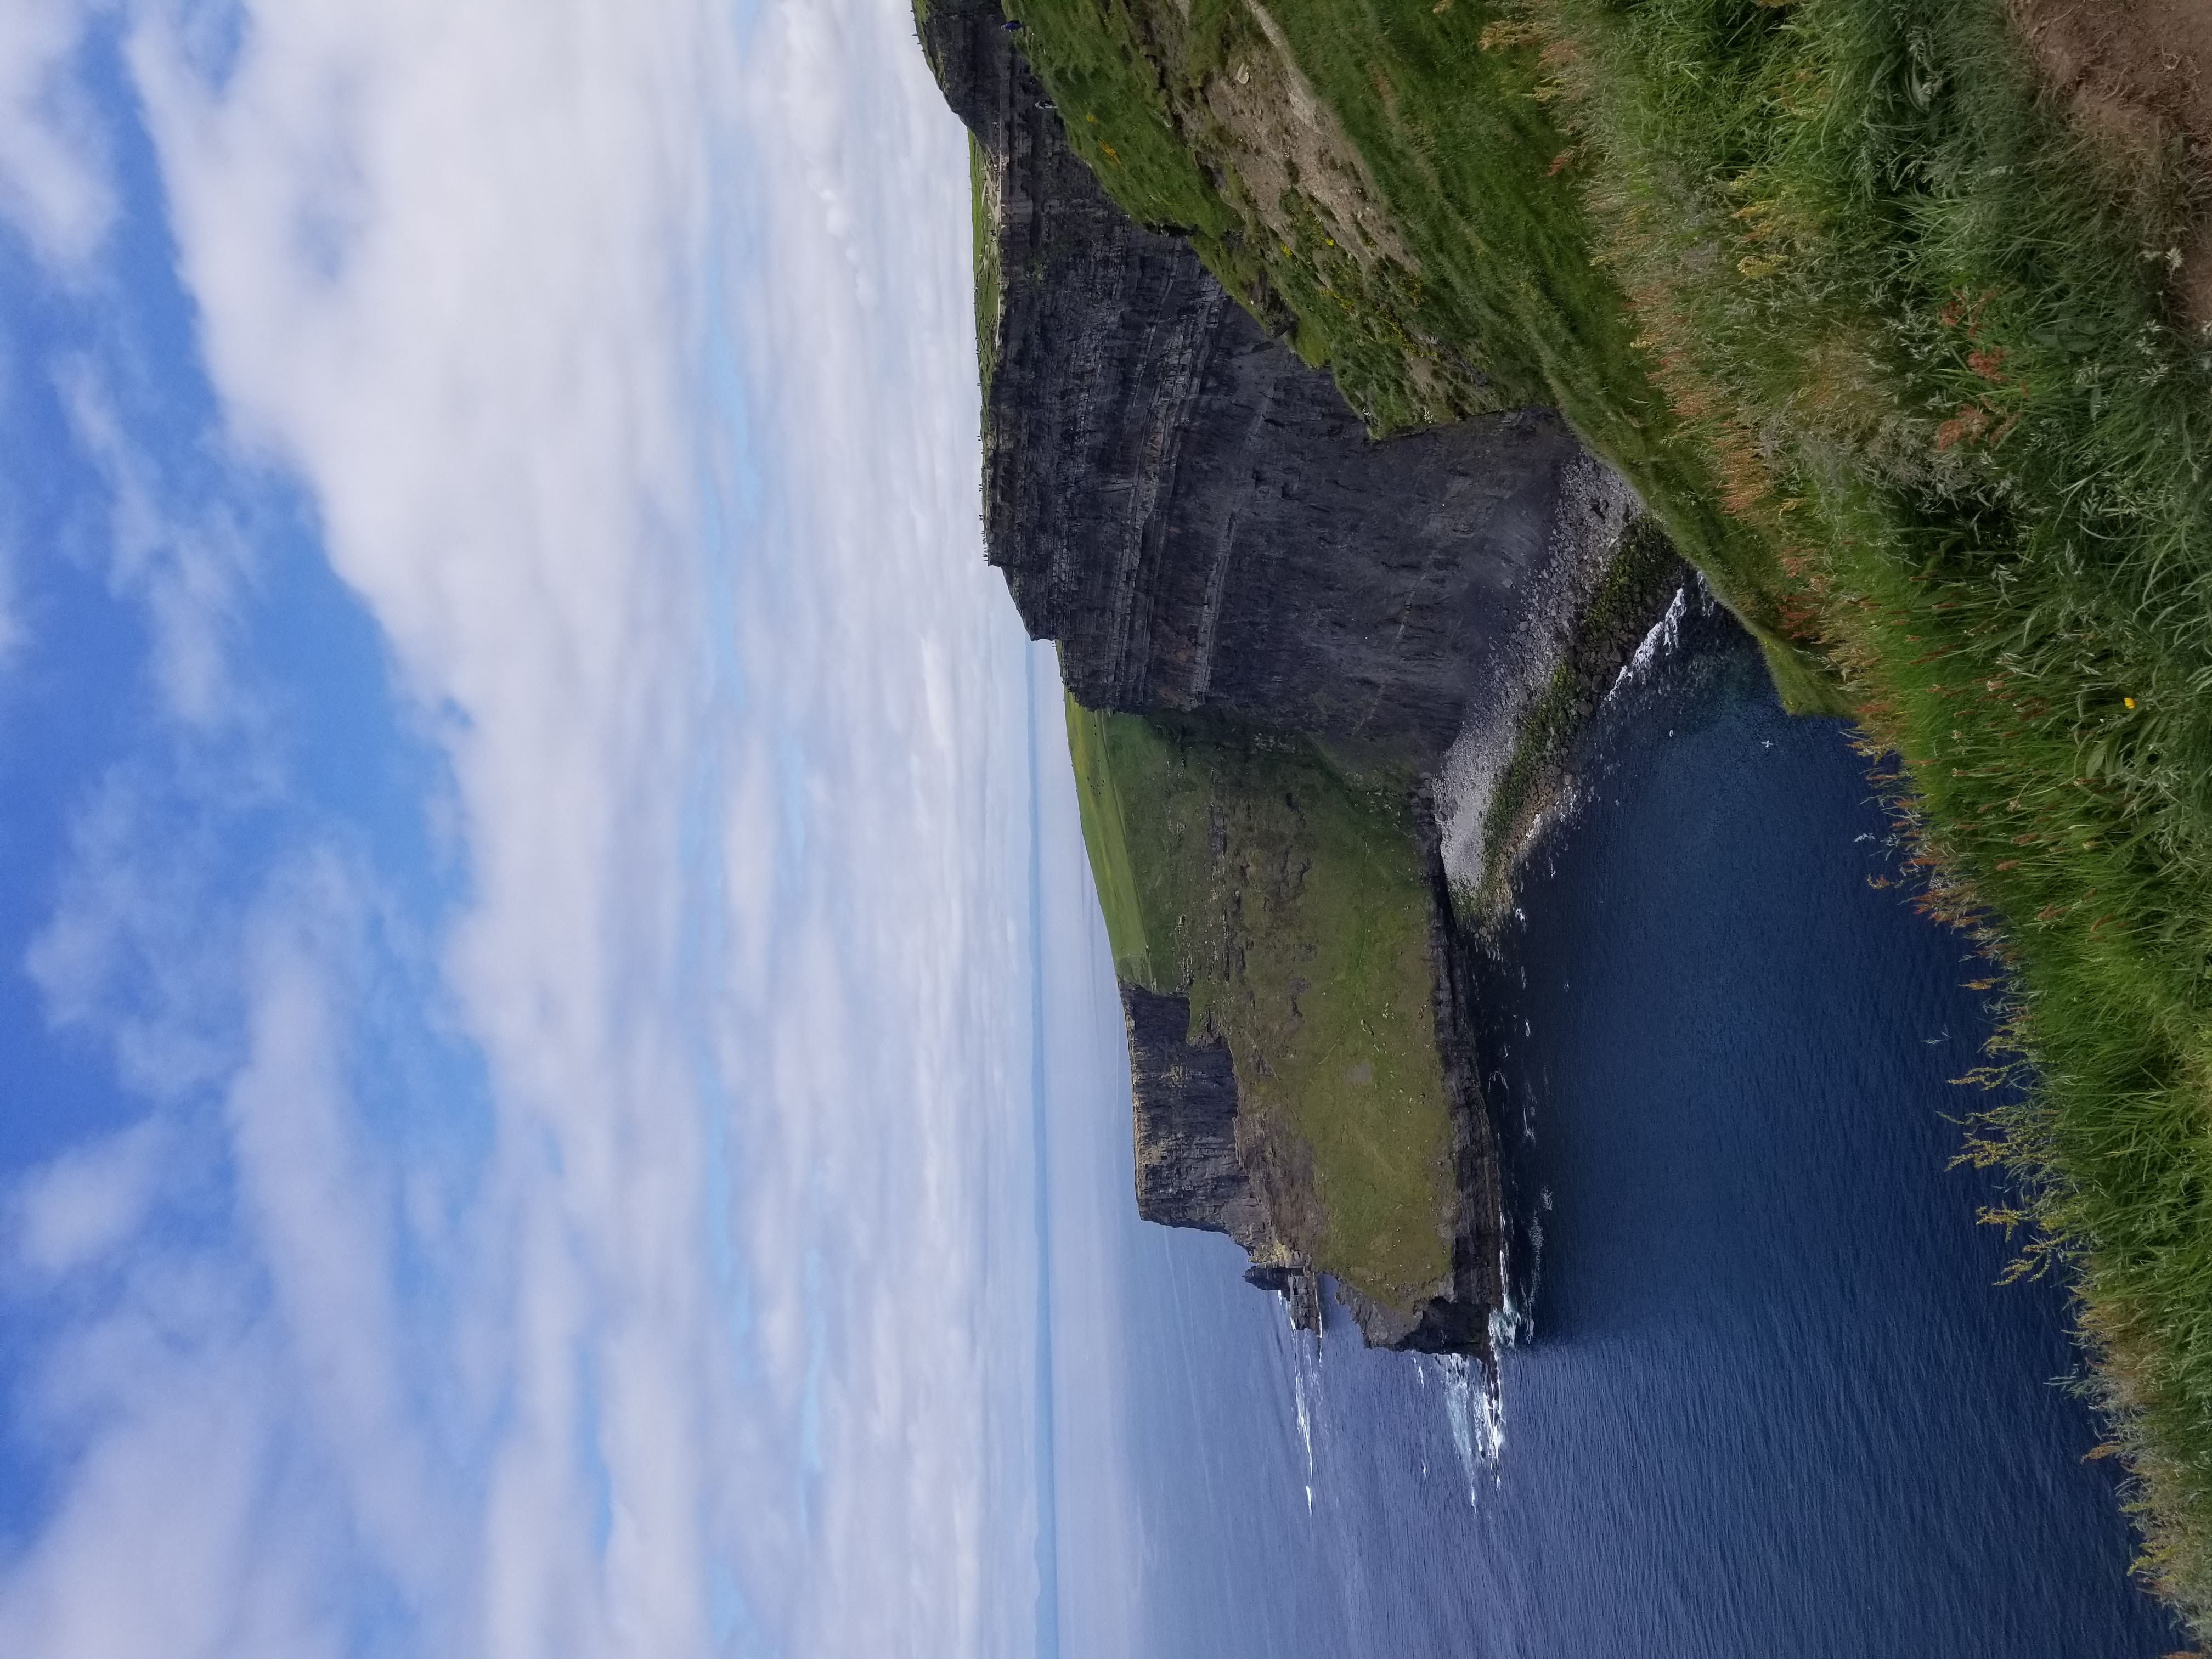 Cliff of Moher. A jagged cliff leading down into the ocean surrounded by sprawling green fields and a slightly cloudy, but otherwise blue, sky.